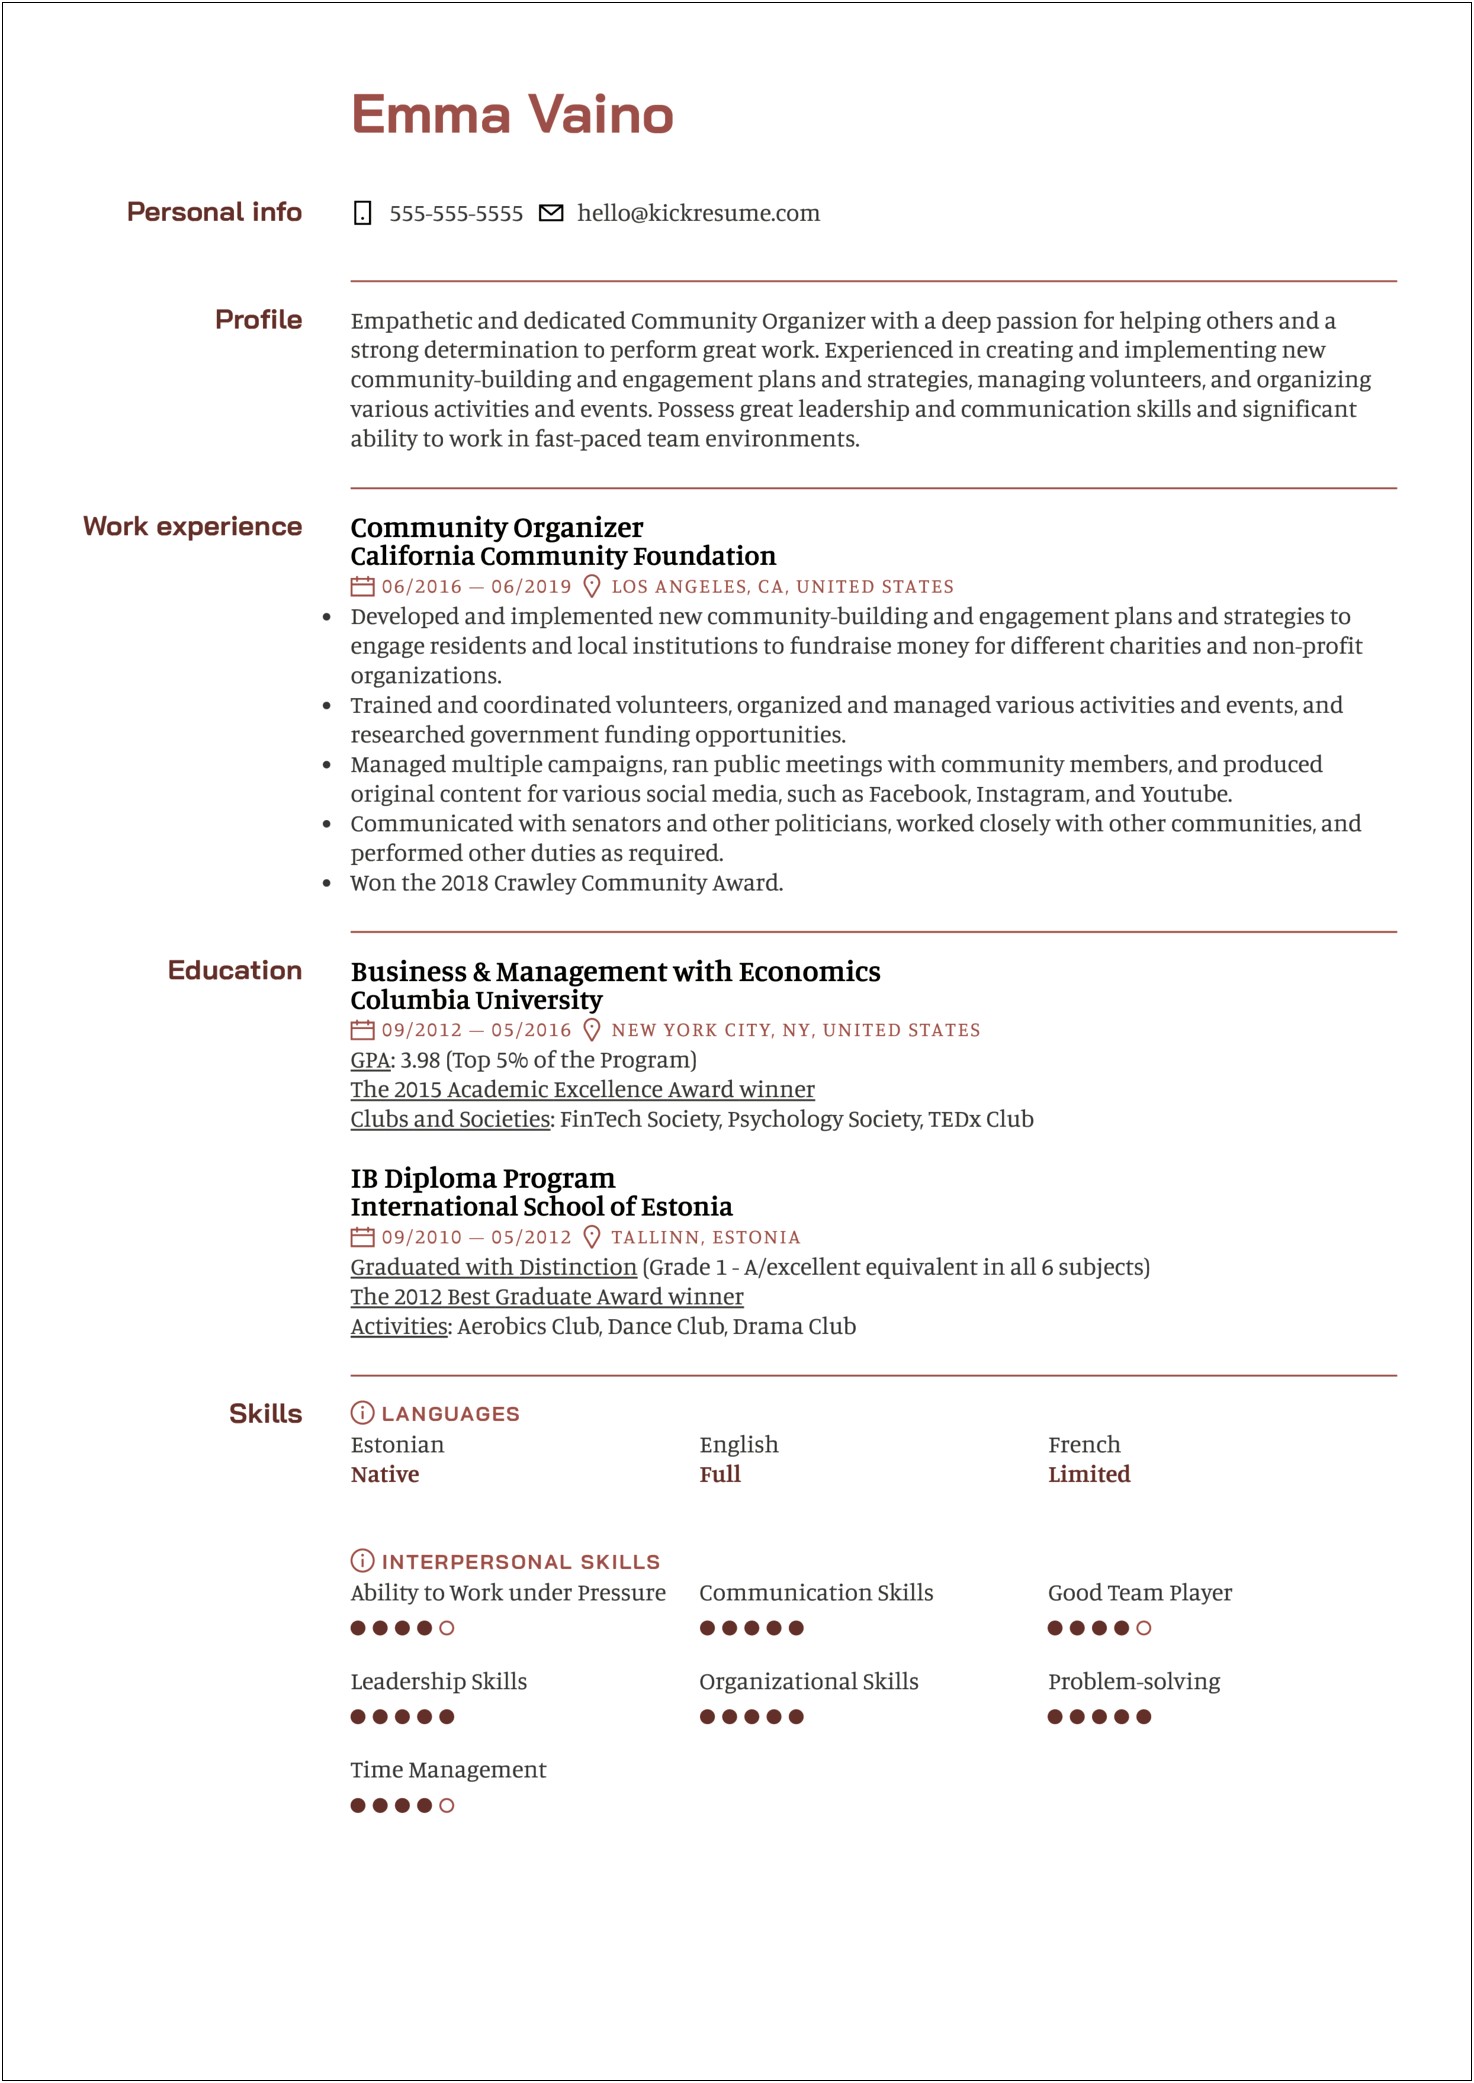 Sample Resume Objectives For Nonprofit Organizations